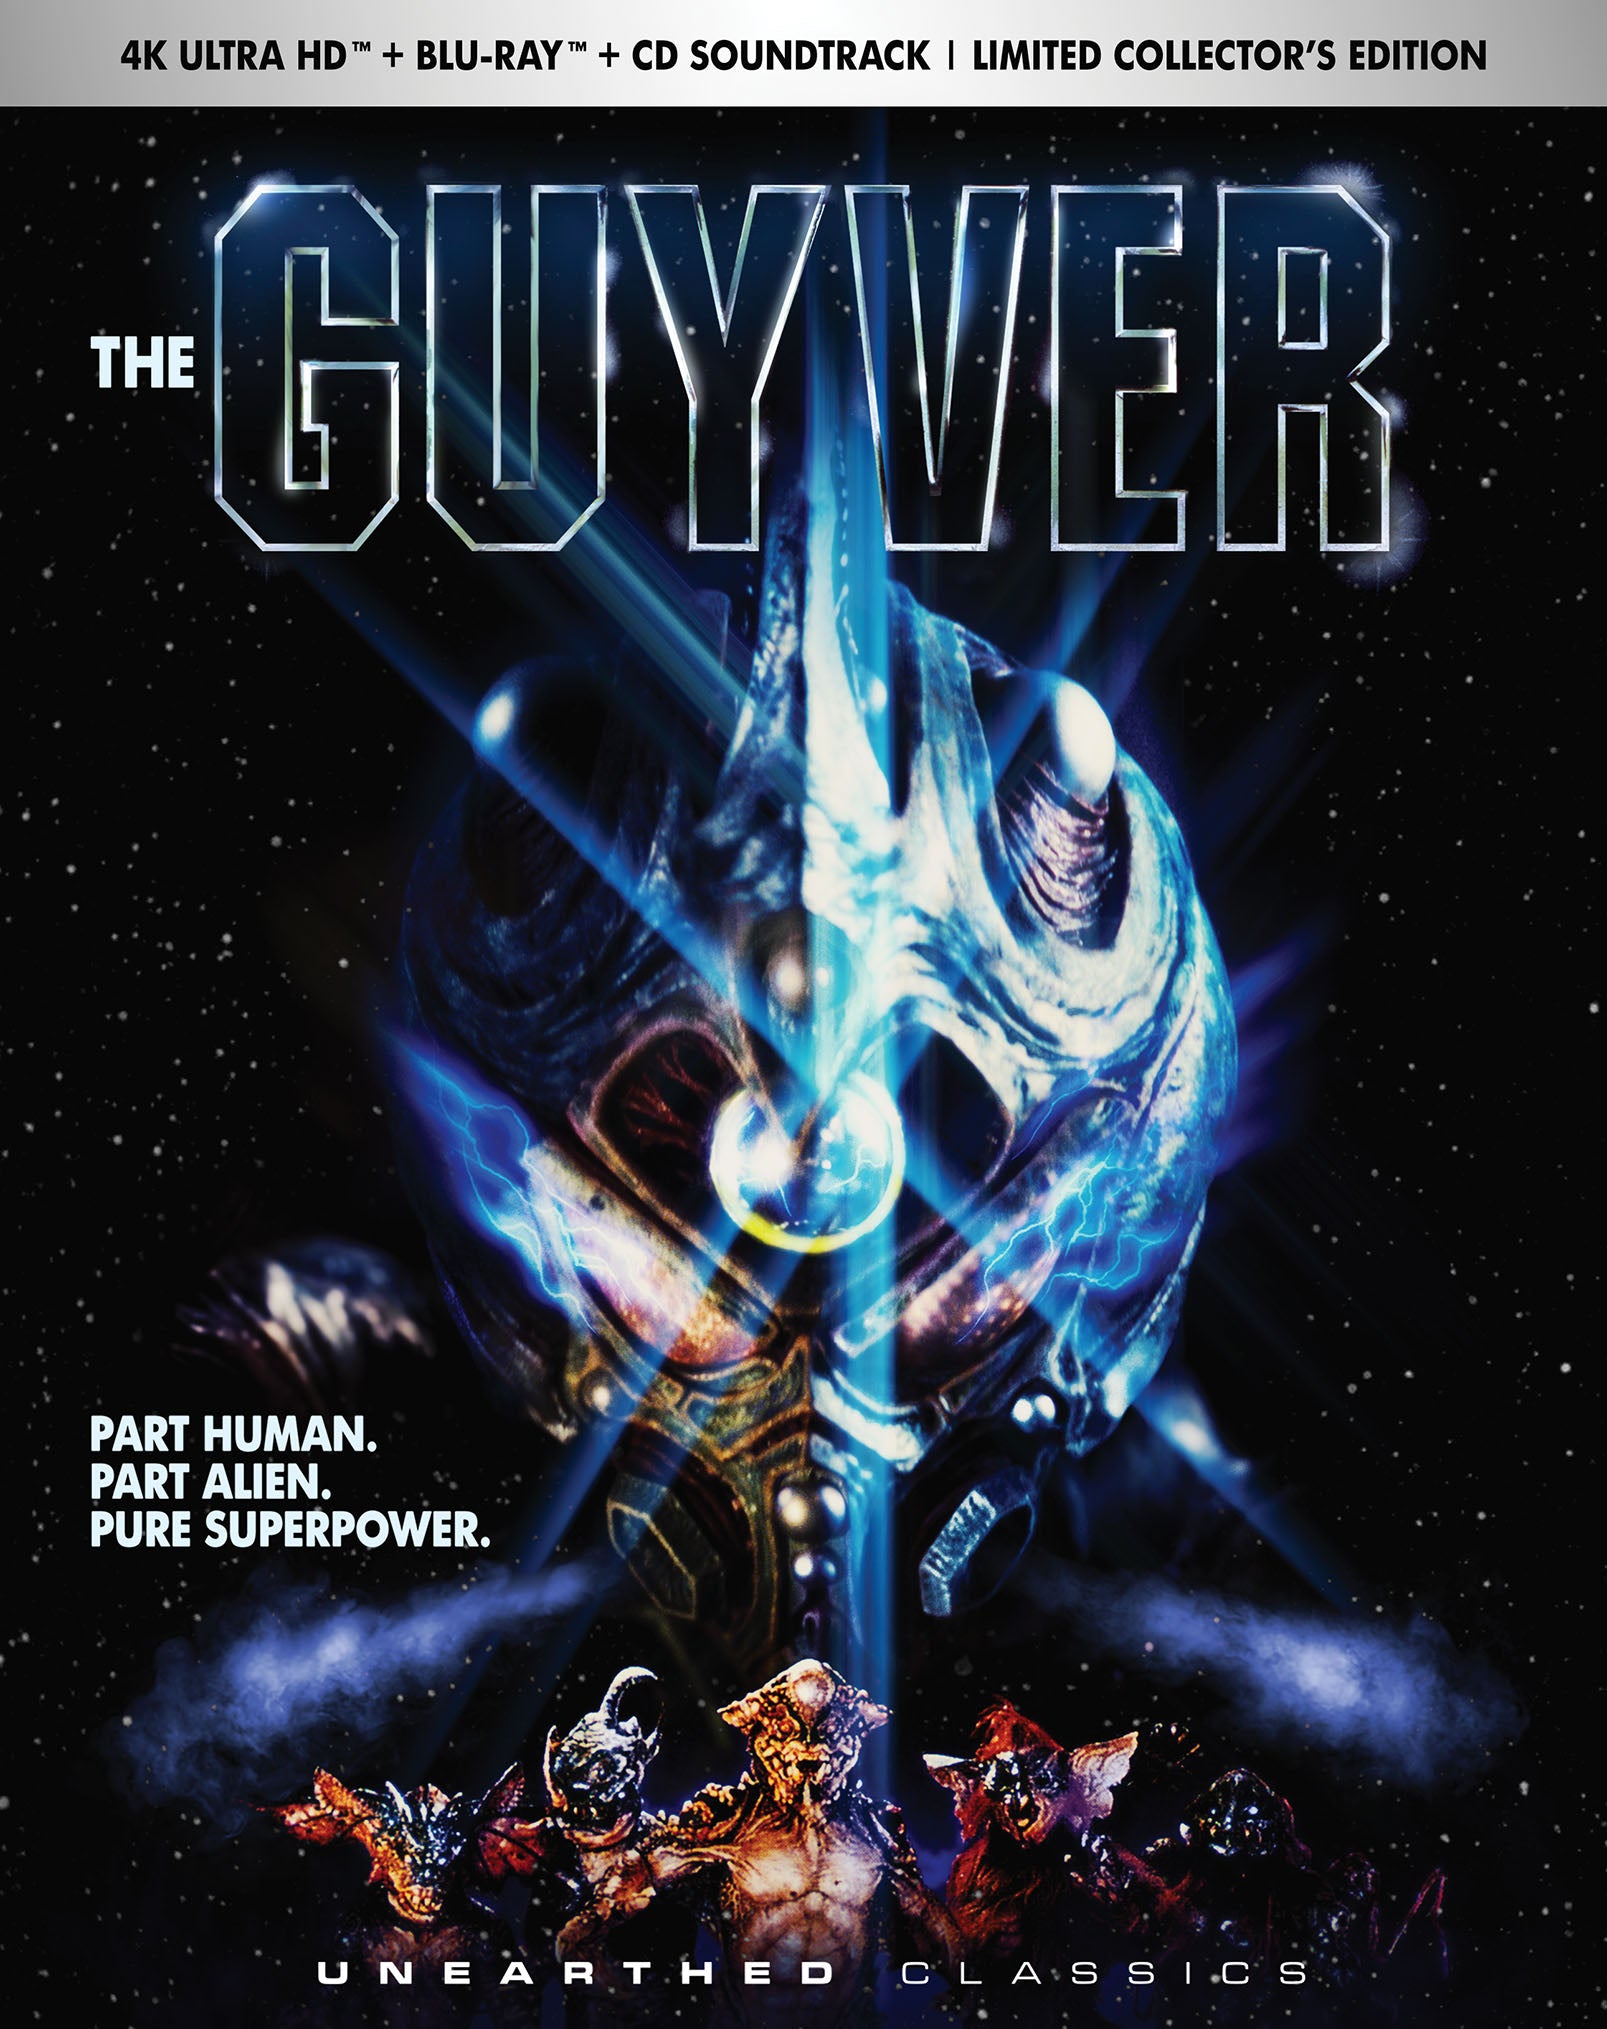 THE GUYVER (LIMITED EDITION) 4K UHD/BLU-RAY/CD [PRE-ORDER]